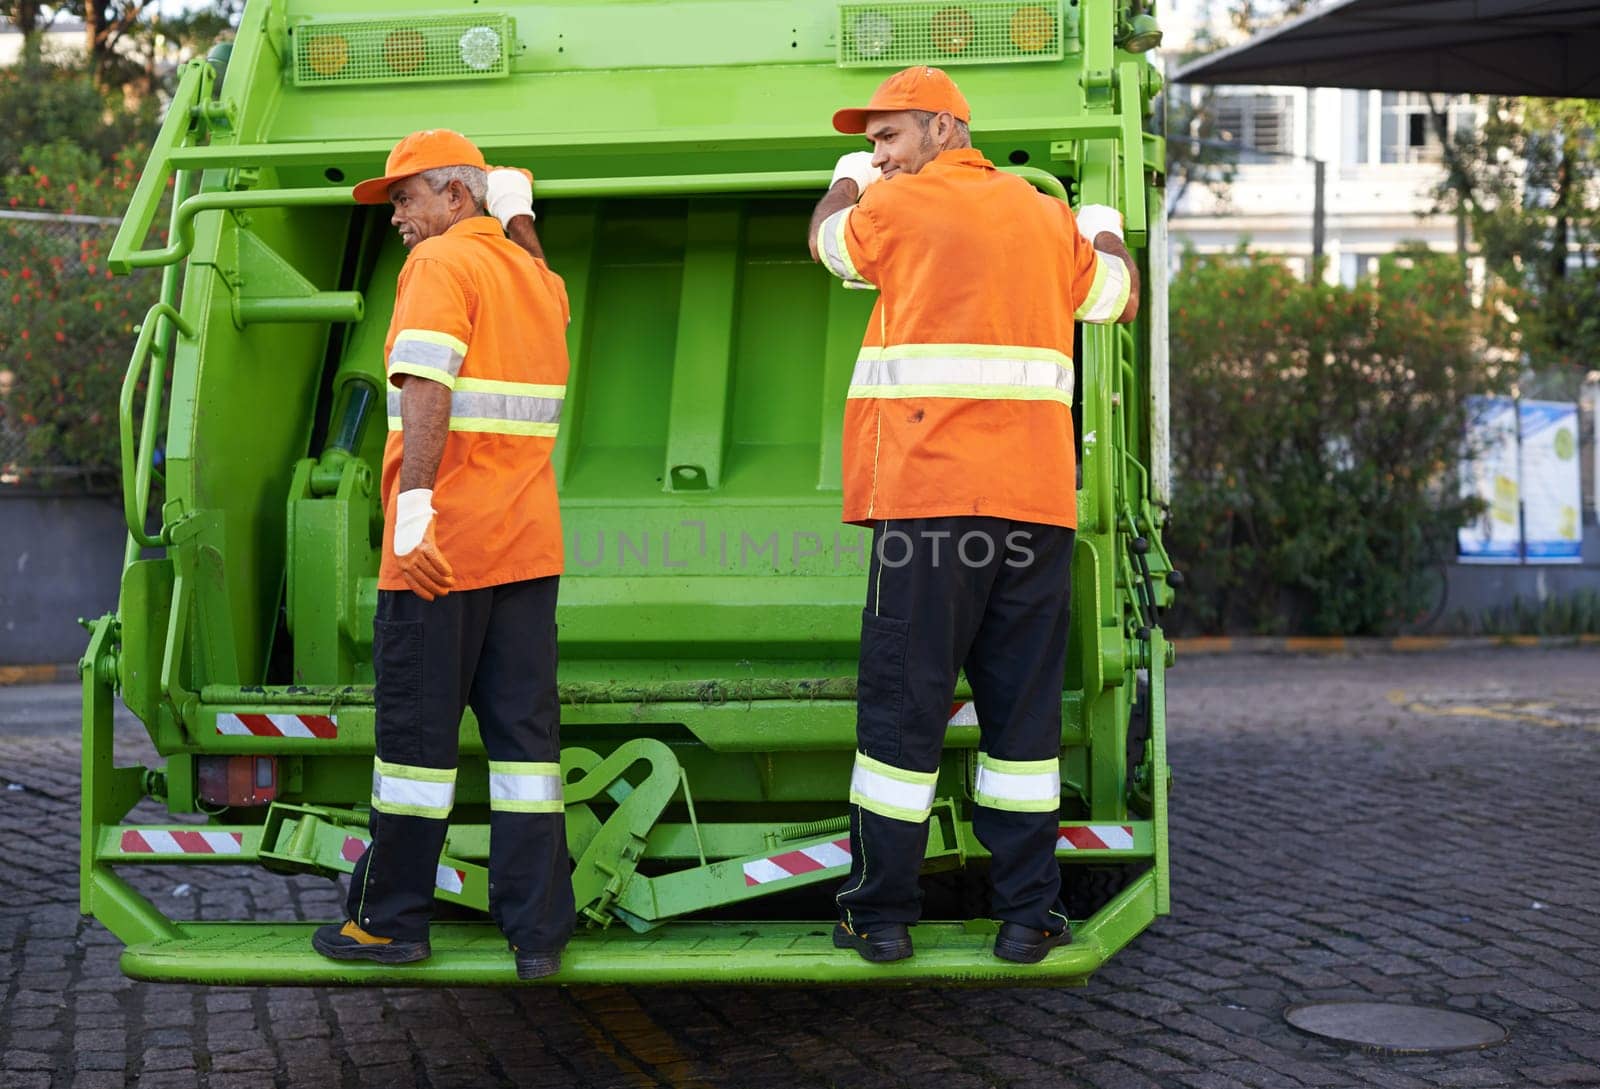 Garbage collector, service and truck for waste management and teamwork with routine and cleaning the city. Road, recycling and environment with transportation and green energy with trash or street.